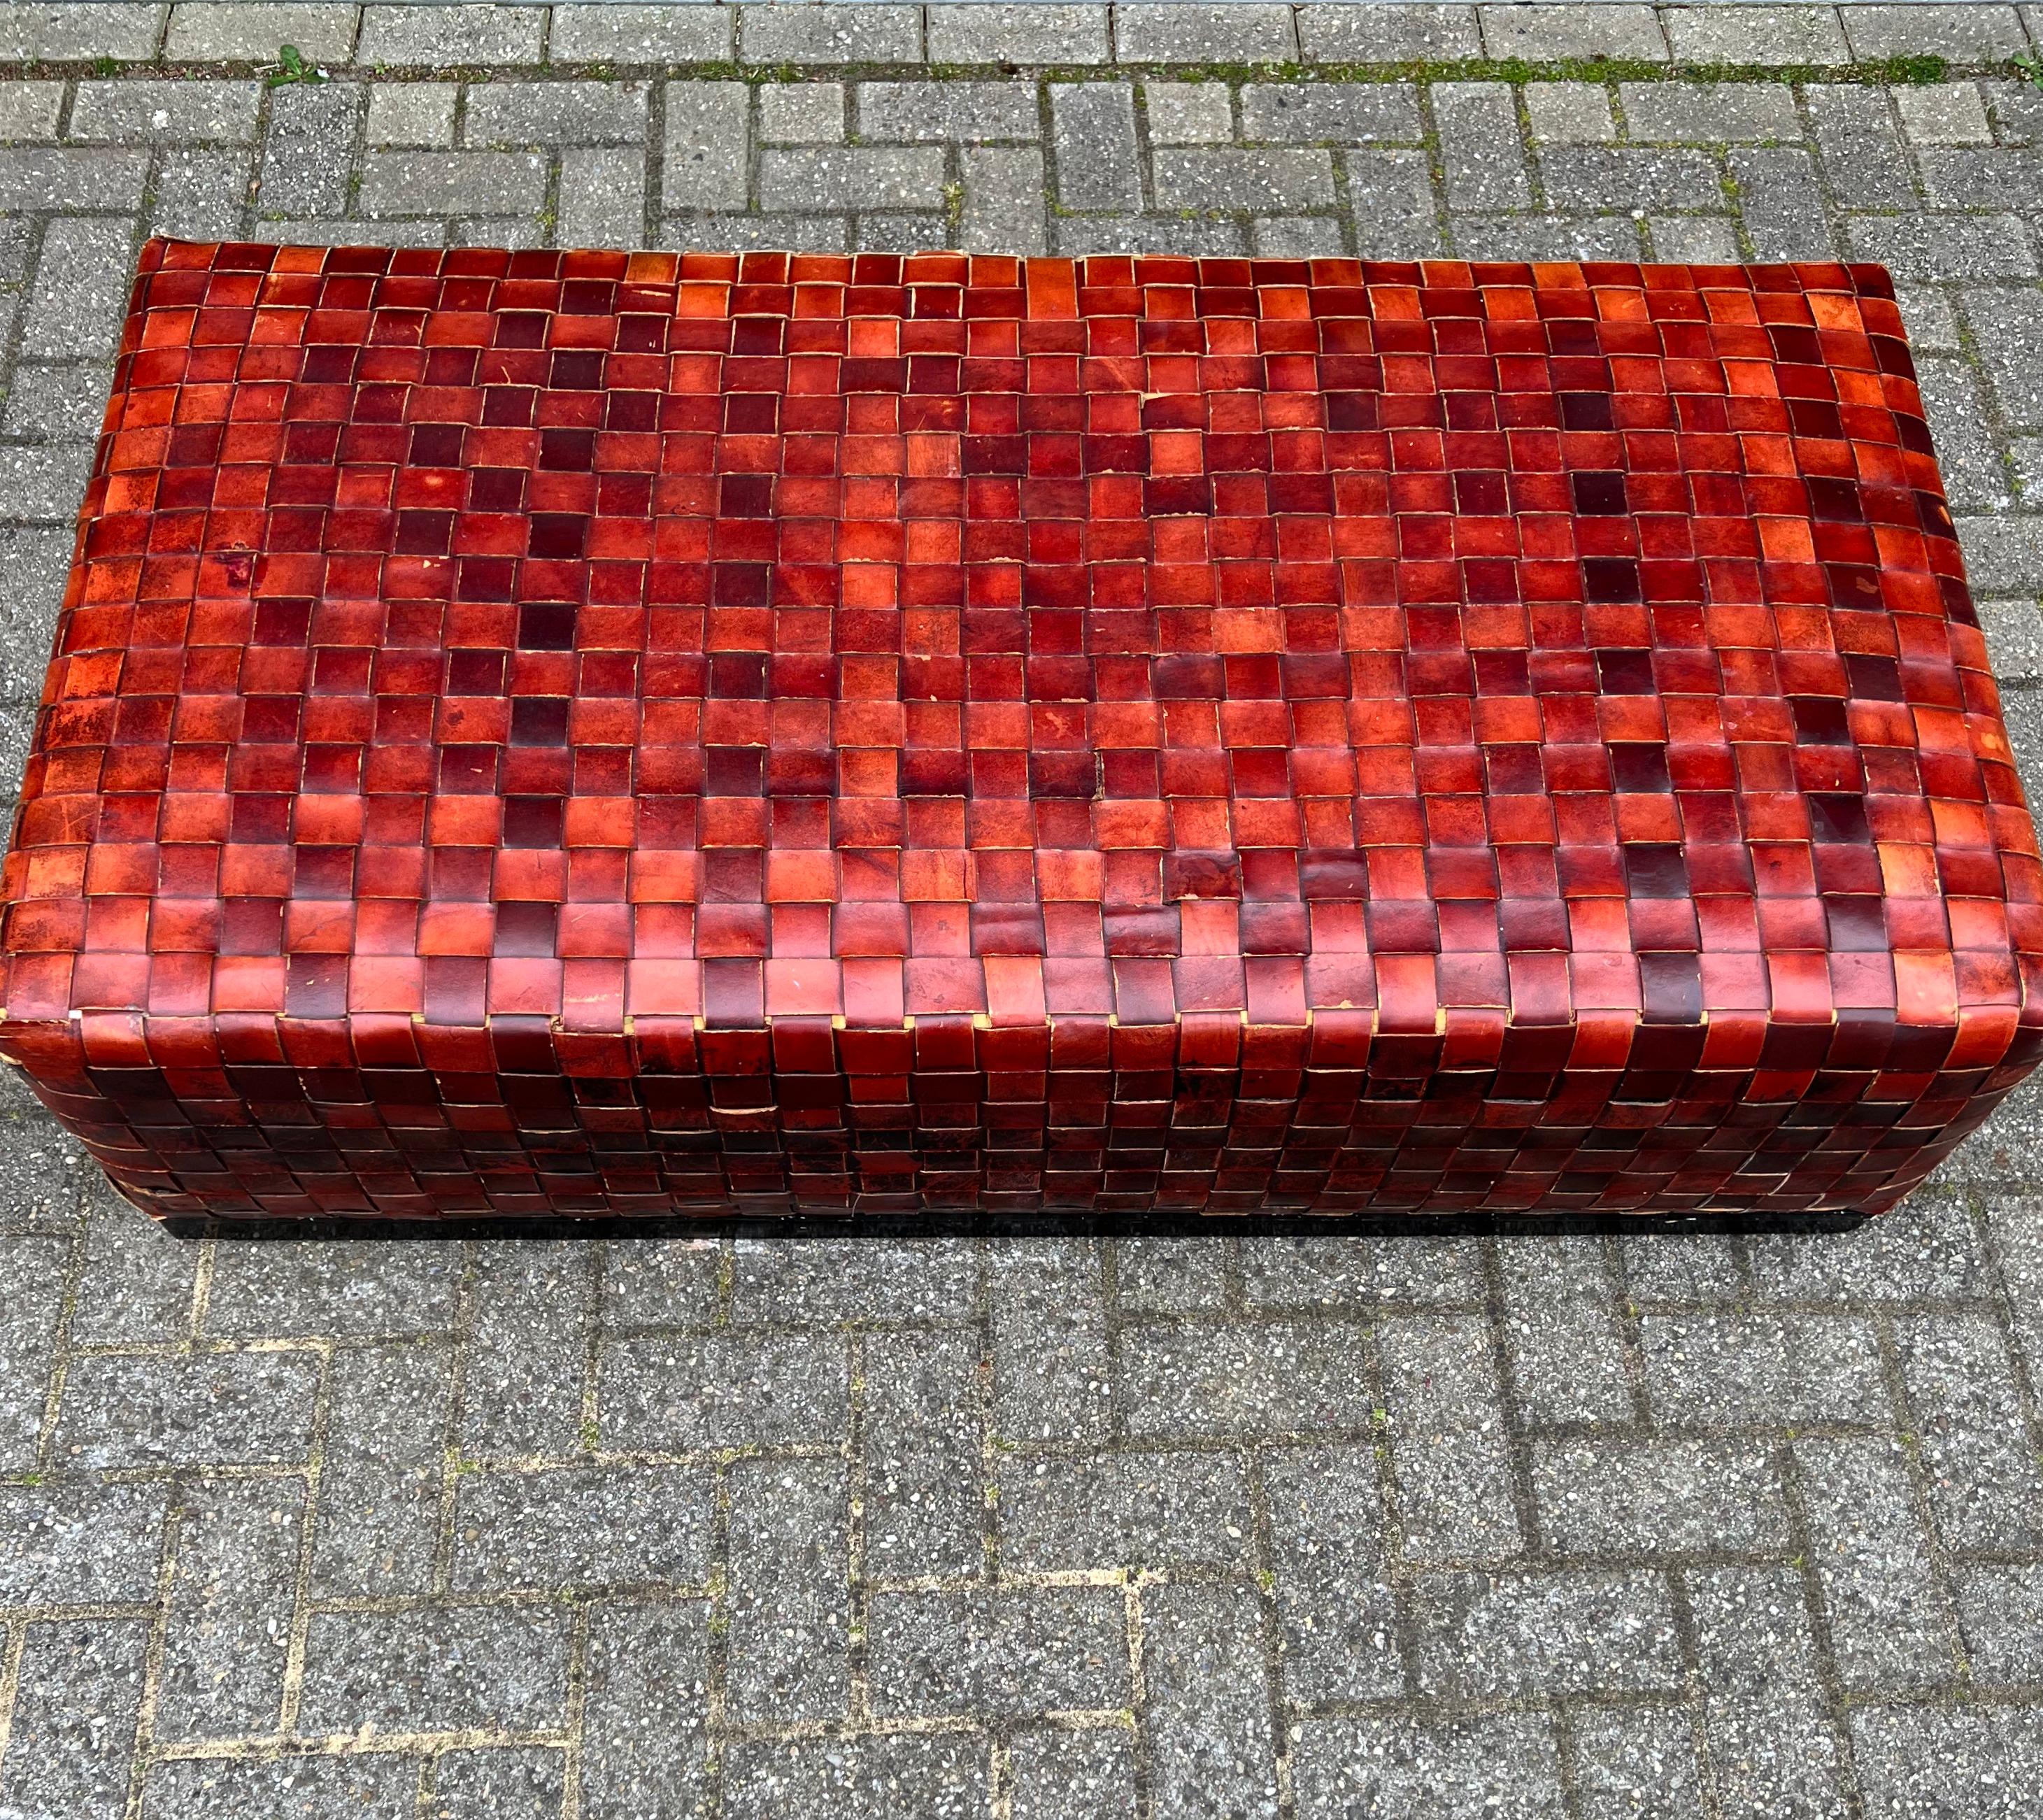 Large and Rare Double Rail Woven Leather Coffee Table or Ottoman Bench, 1990s For Sale 1